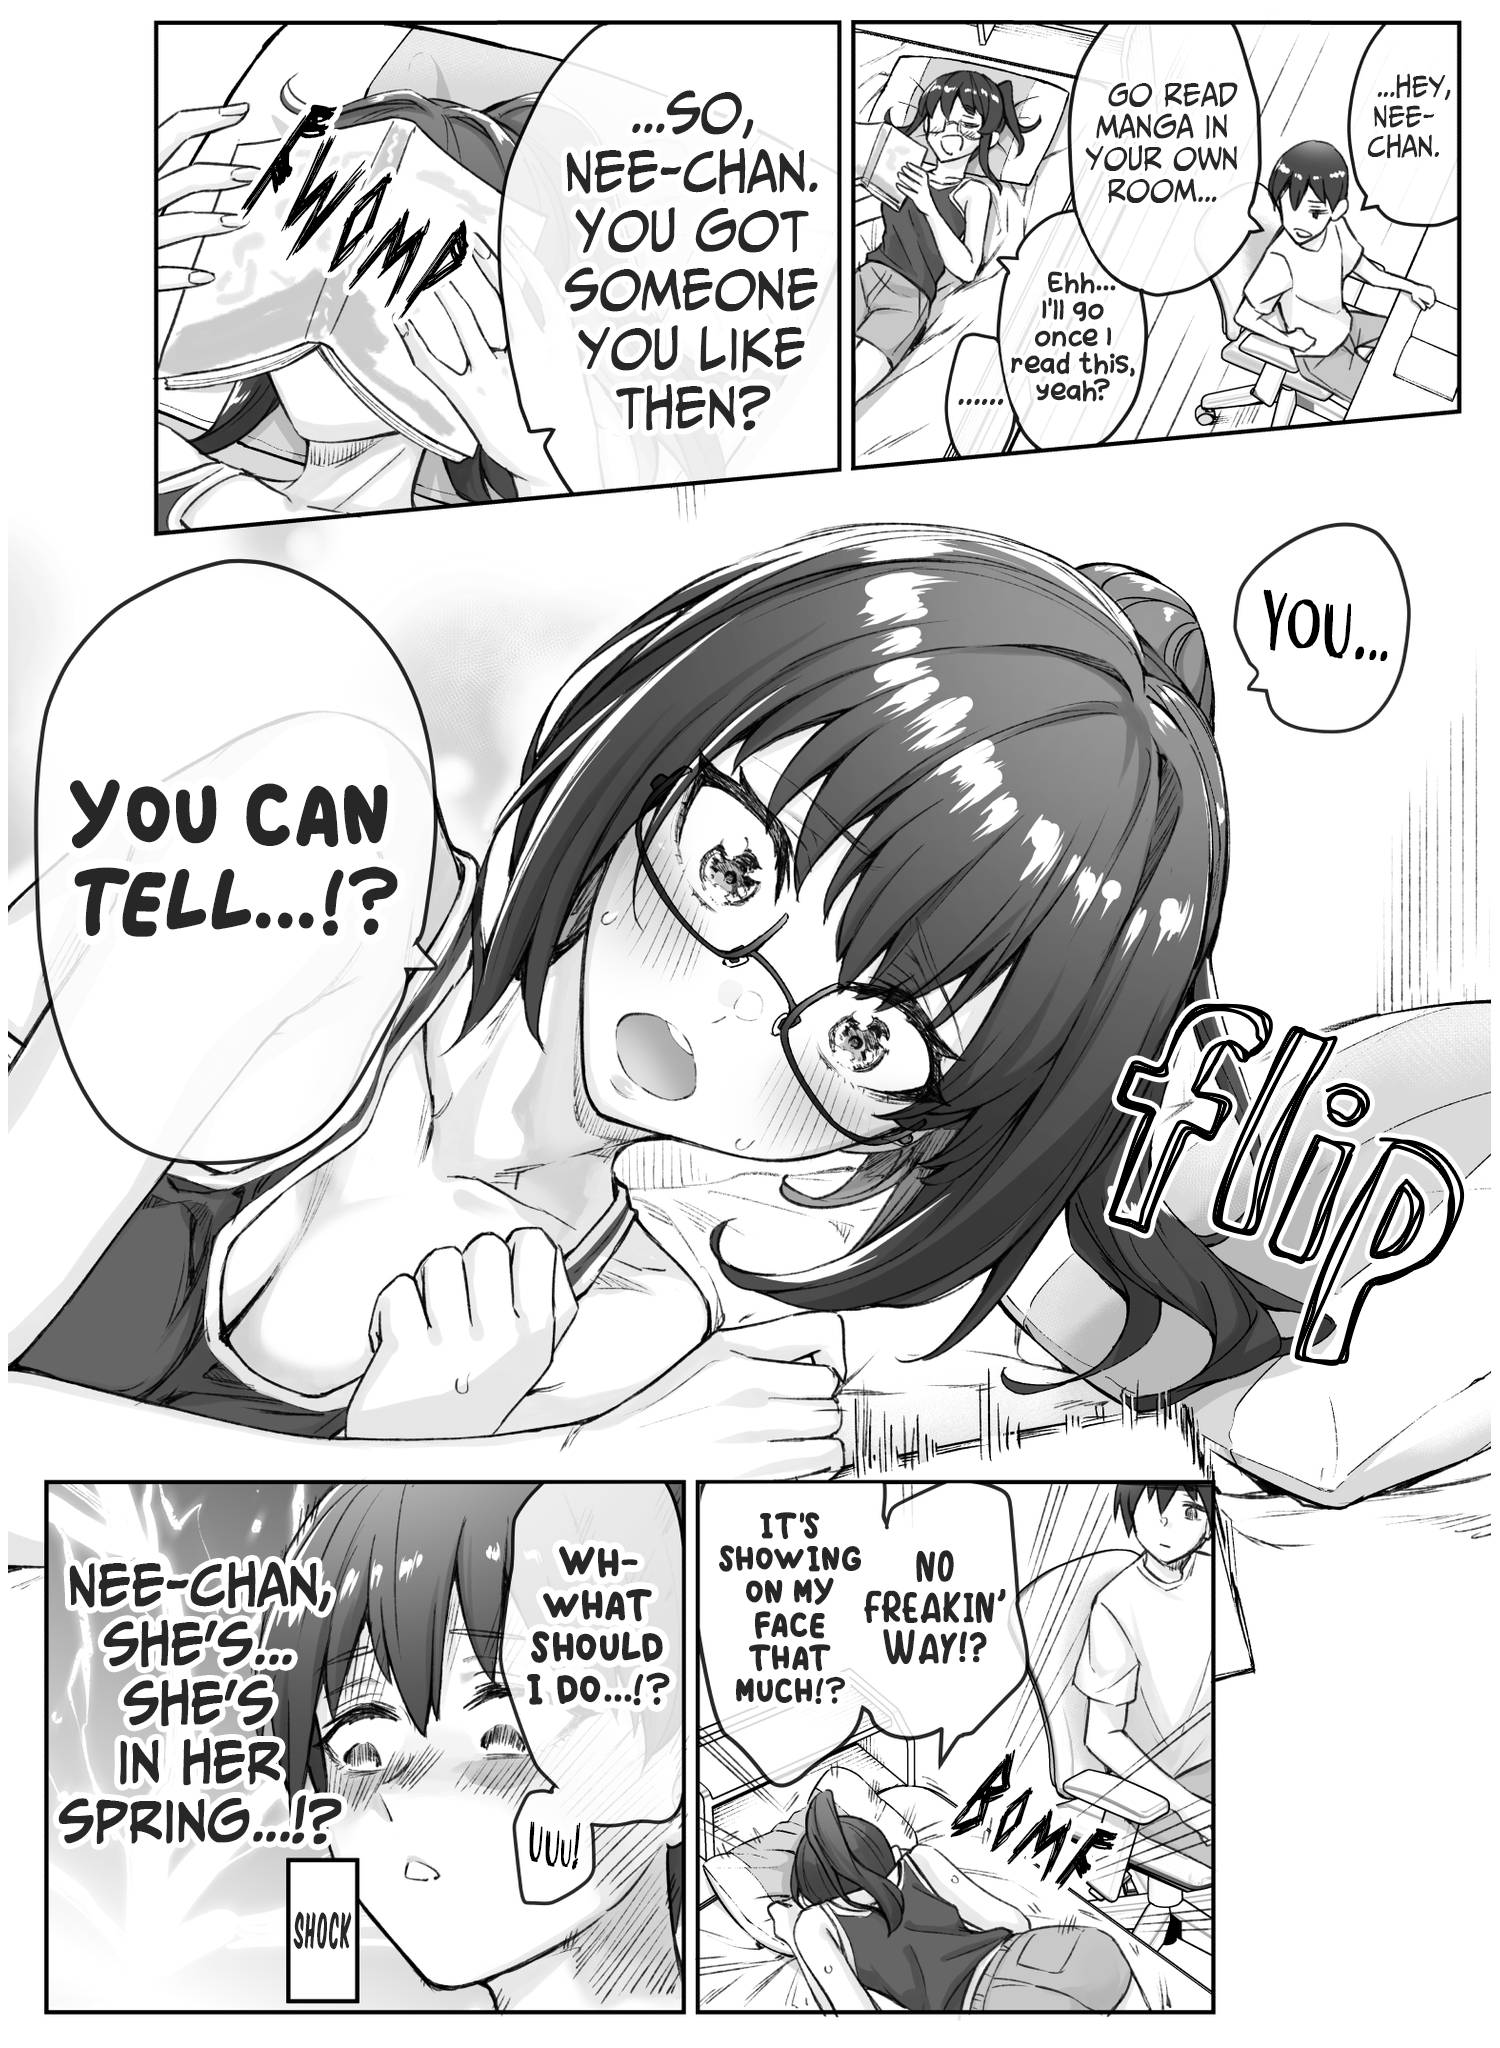 The Tsuntsuntsuntsuntsuntsun Tsuntsuntsuntsuntsundere Girl Getting Less And Less Tsun Day By Day - chapter 21 - #1